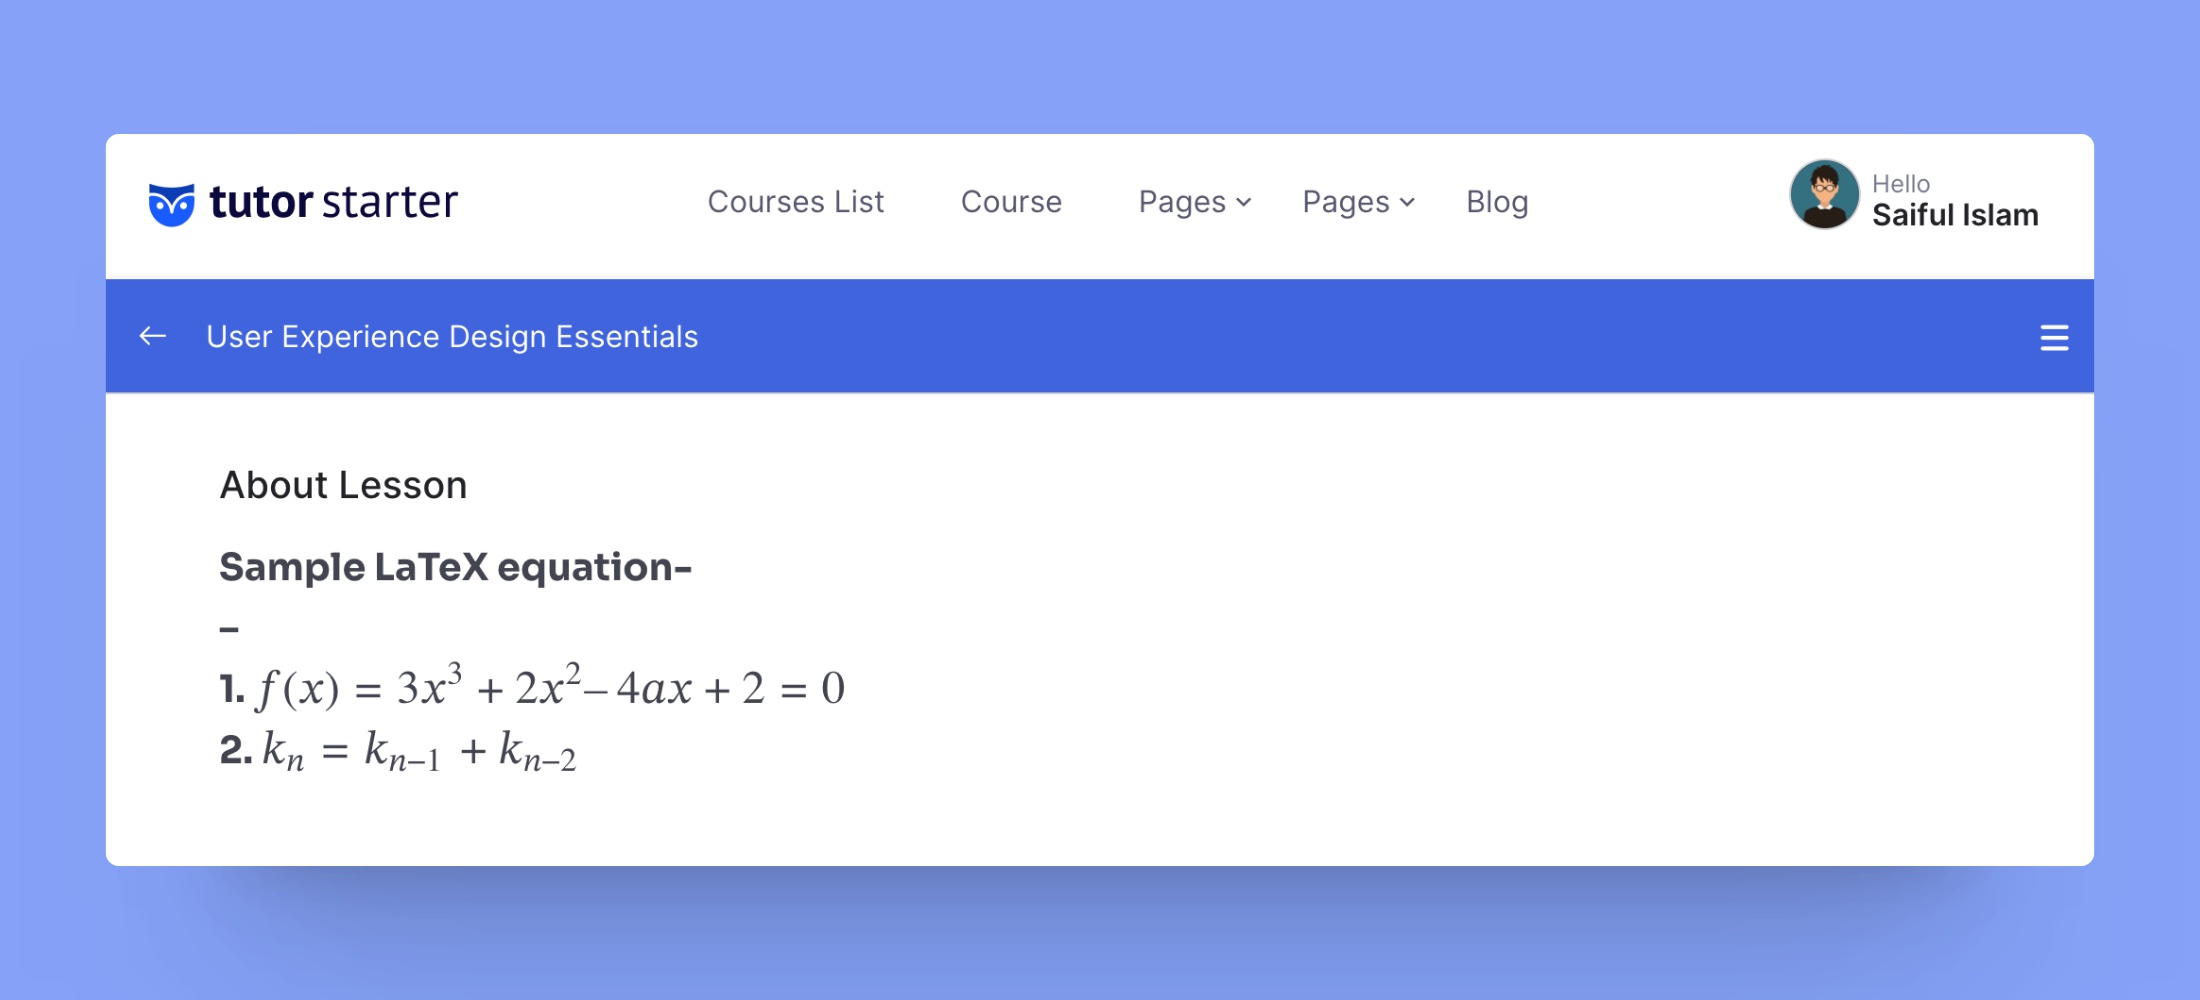 Documention | How to Add Math Equations in Tutor LMS using LaTex